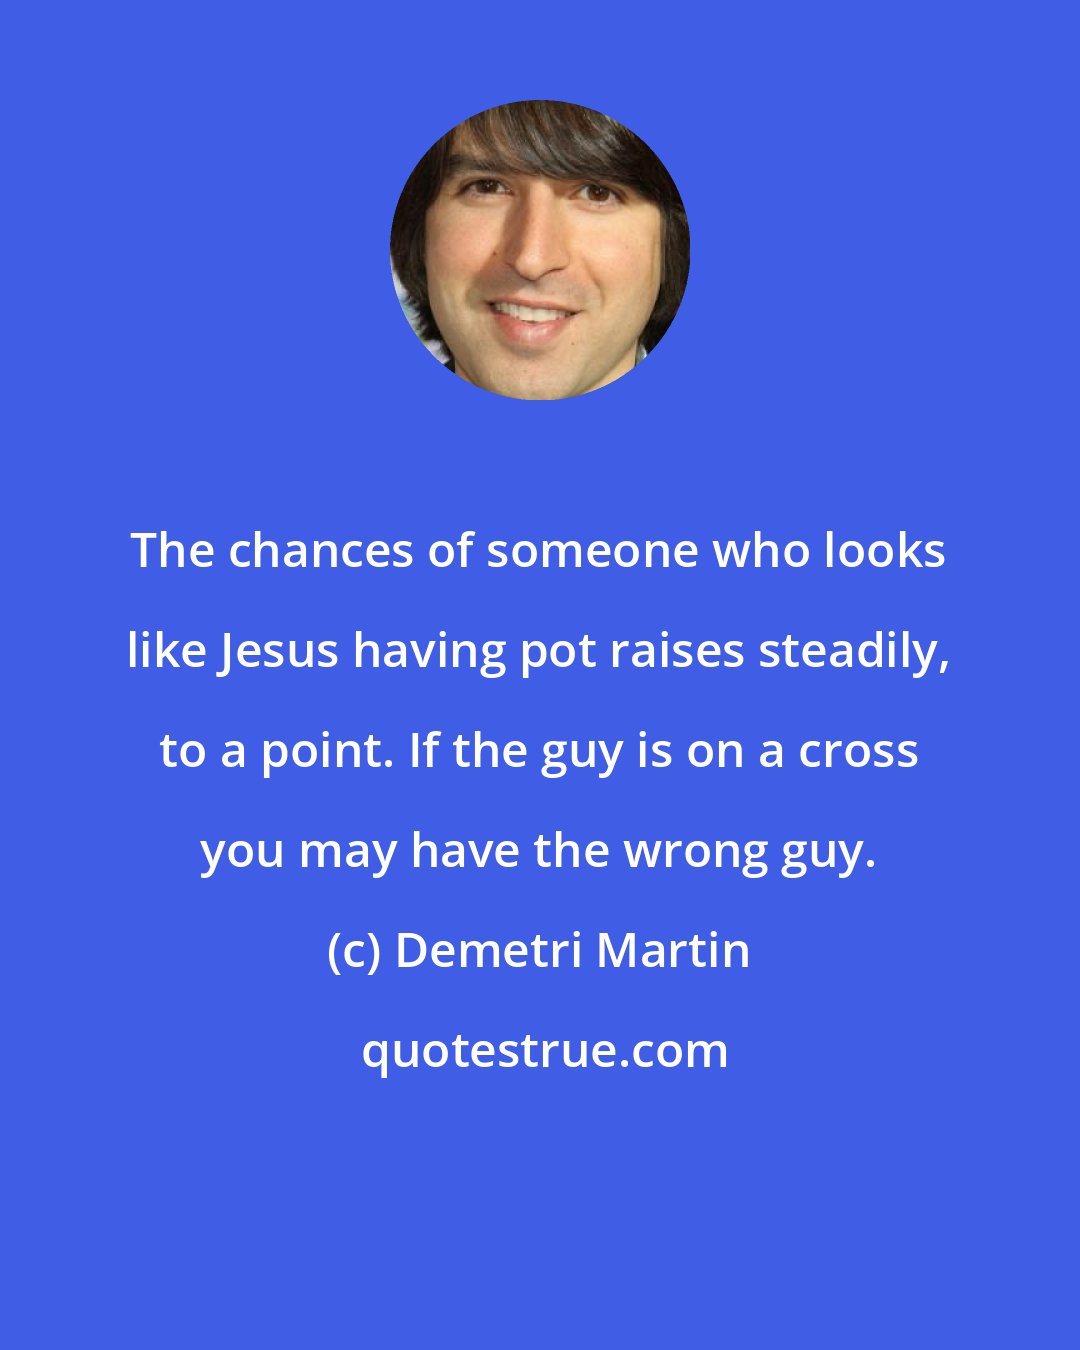 Demetri Martin: The chances of someone who looks like Jesus having pot raises steadily, to a point. If the guy is on a cross you may have the wrong guy.